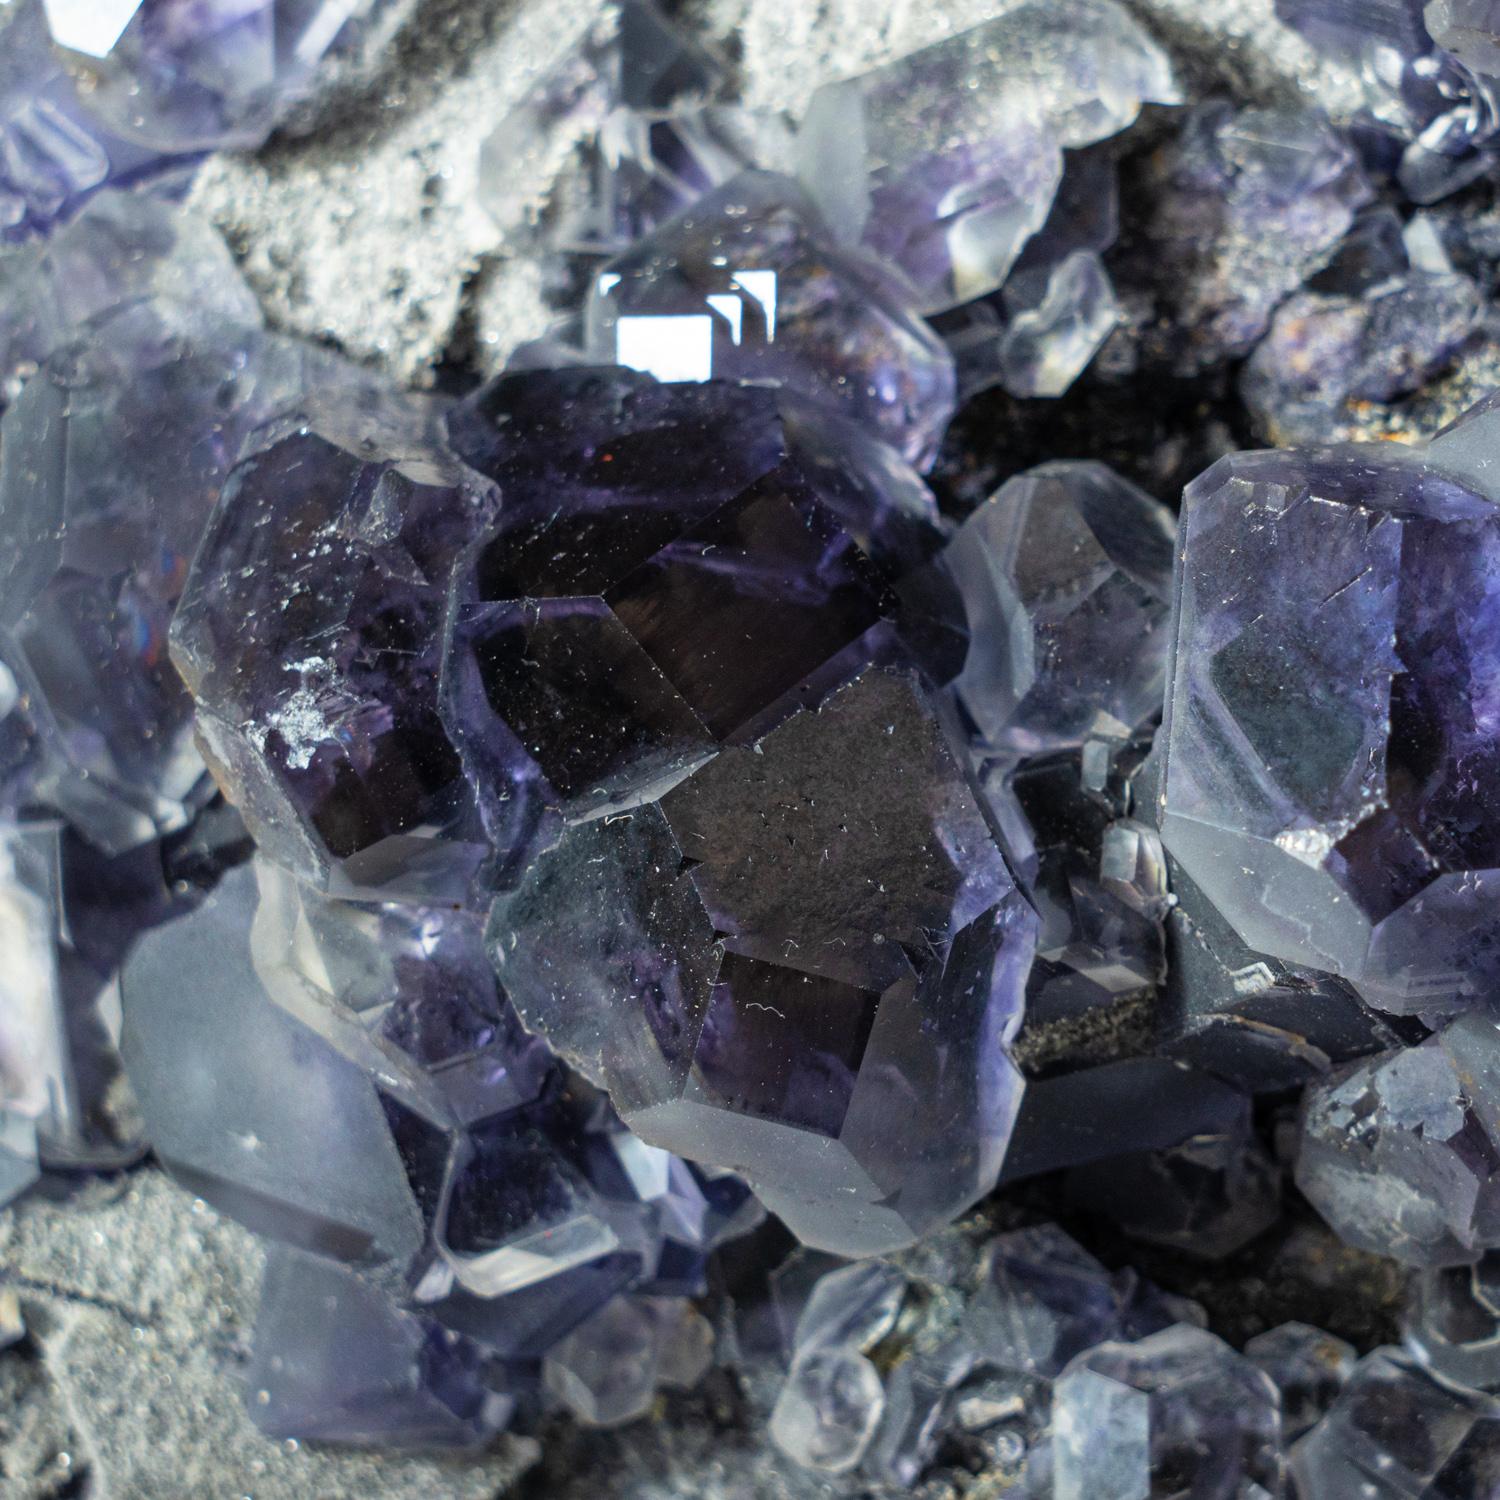 From Minggang Mine, Henan Province, China Translucent cubic purple fluorite crystals overgrown on a bed of metallic luster sphalerite crystals on matrix. The fluorite has rich purple zoning outlining the crystal faces. The combination creates a